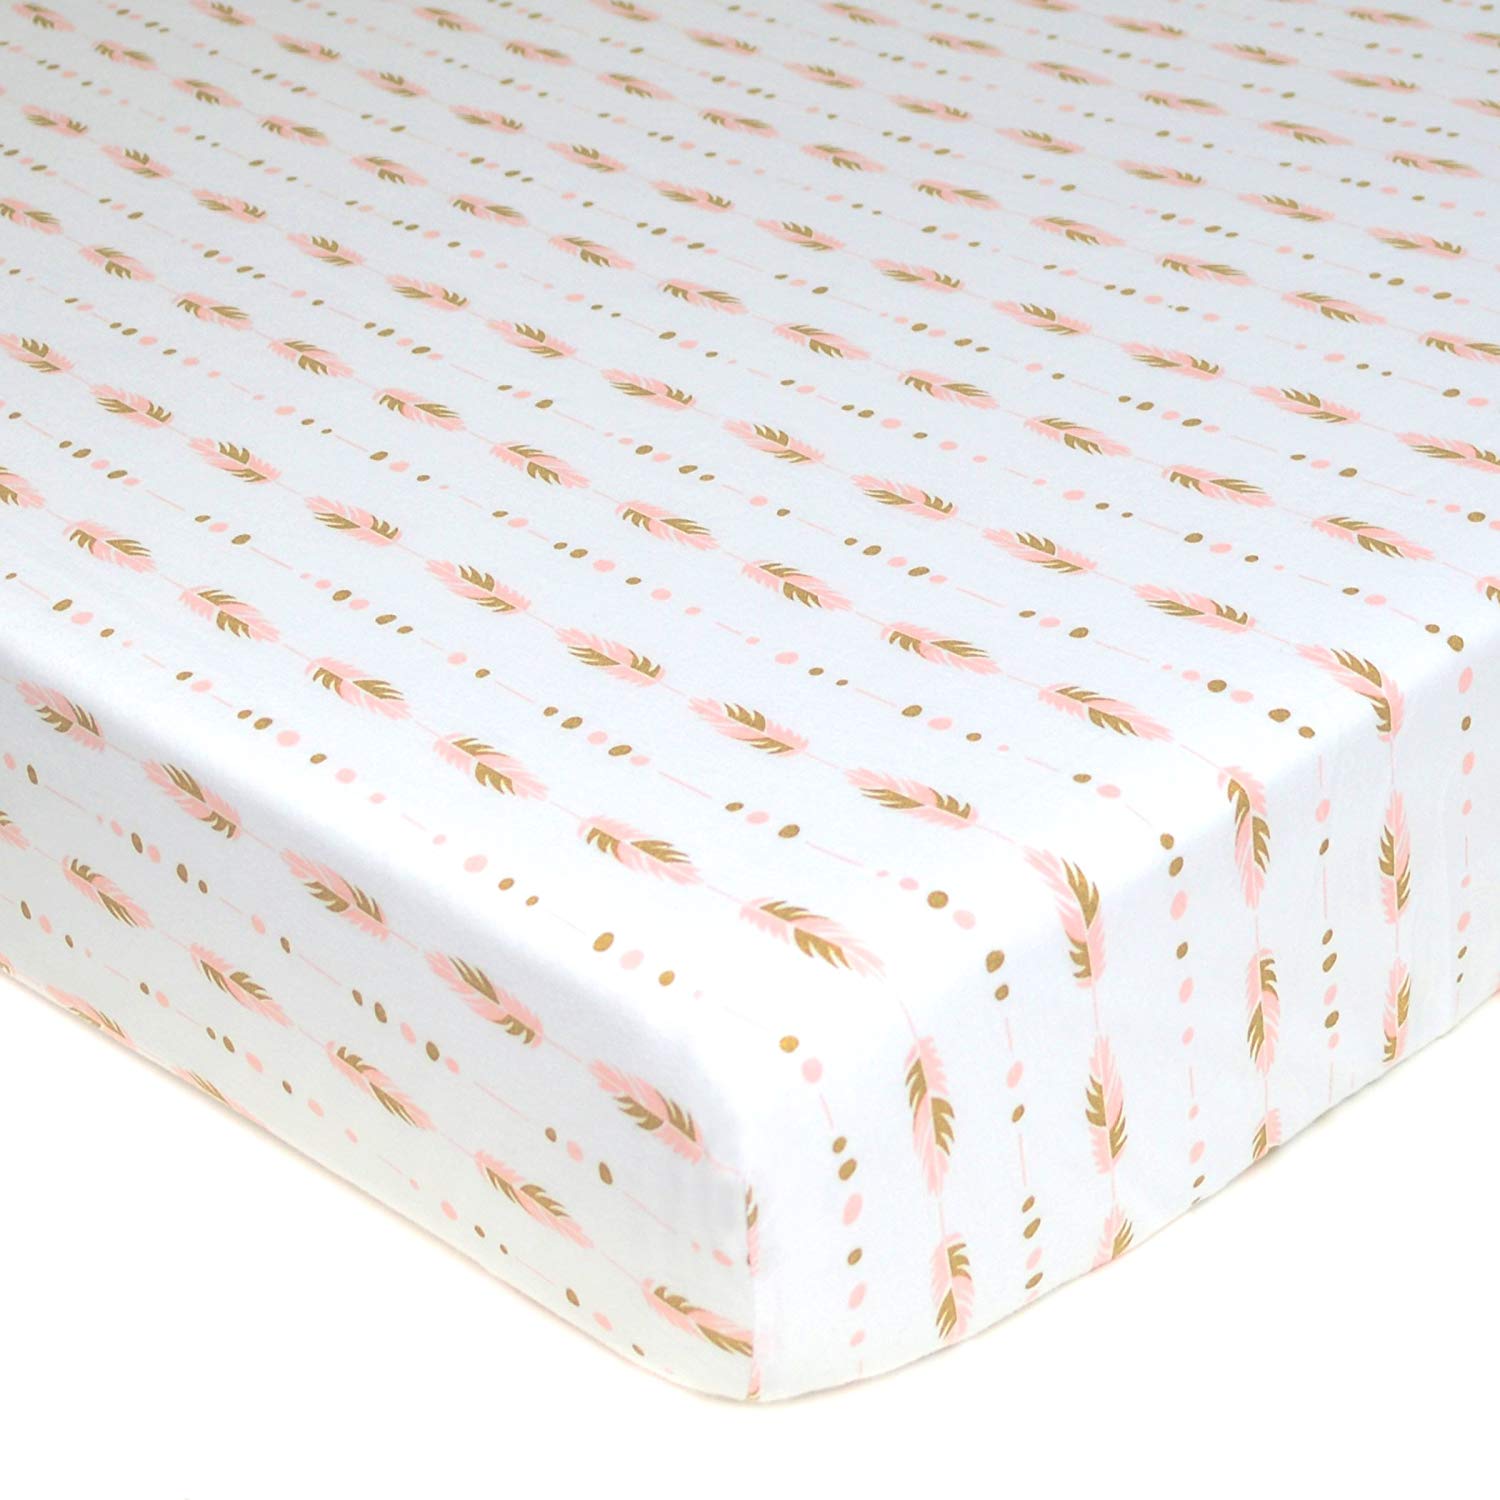 American Baby Company Knit Jersey Crib Sheet - Gold / Pk Feather